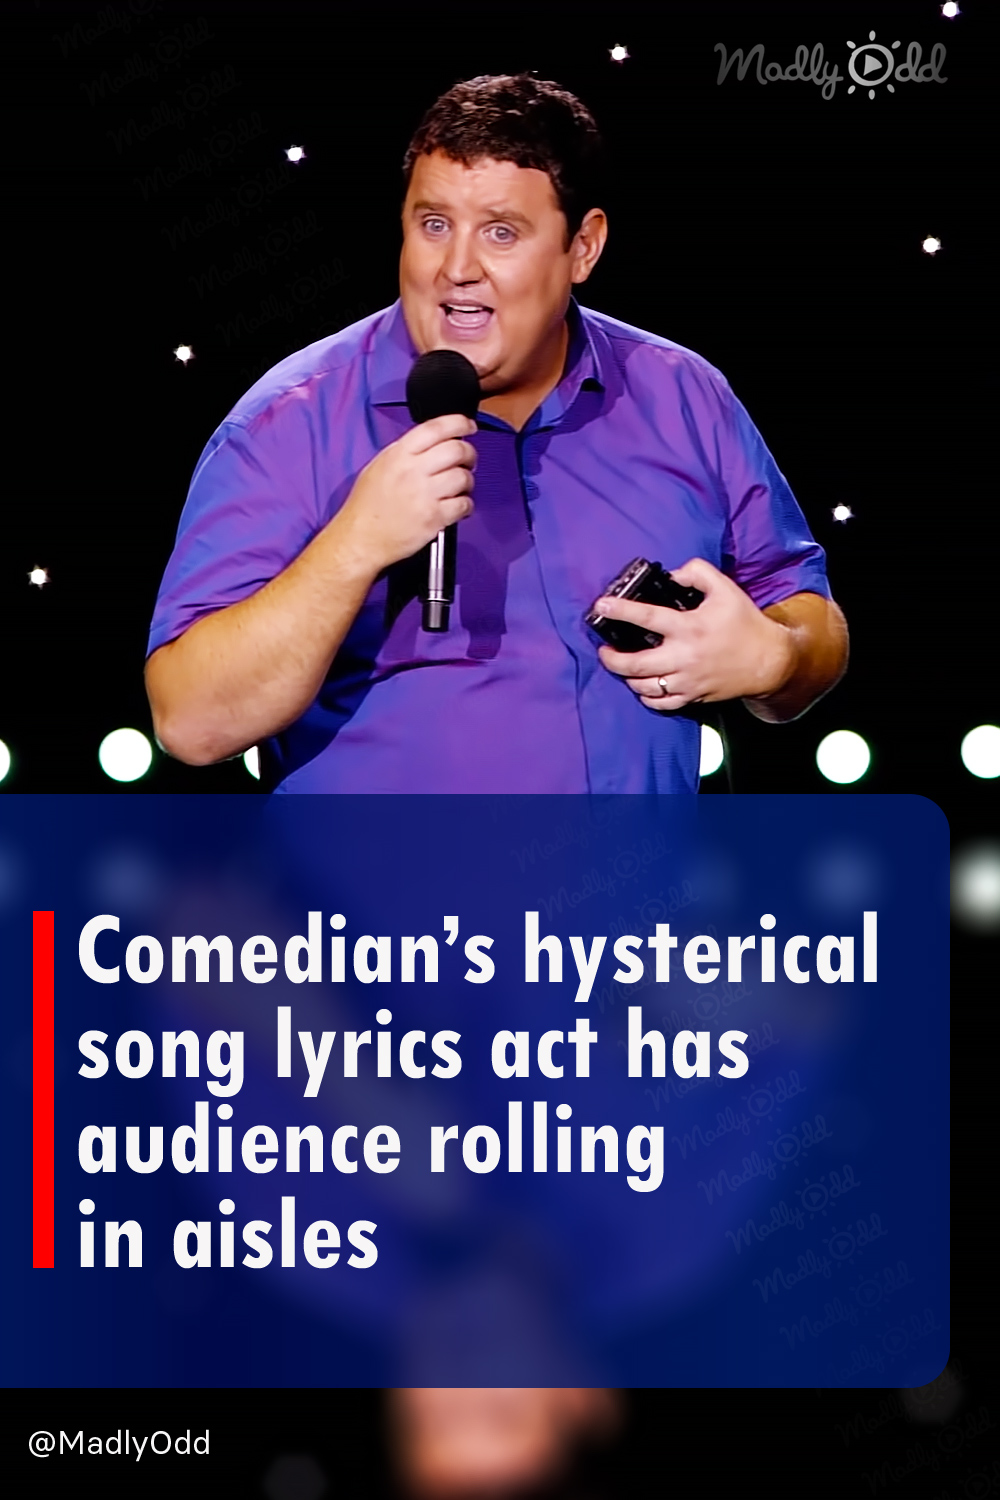 Comedian’s hysterical song lyrics act has audience rolling in aisles